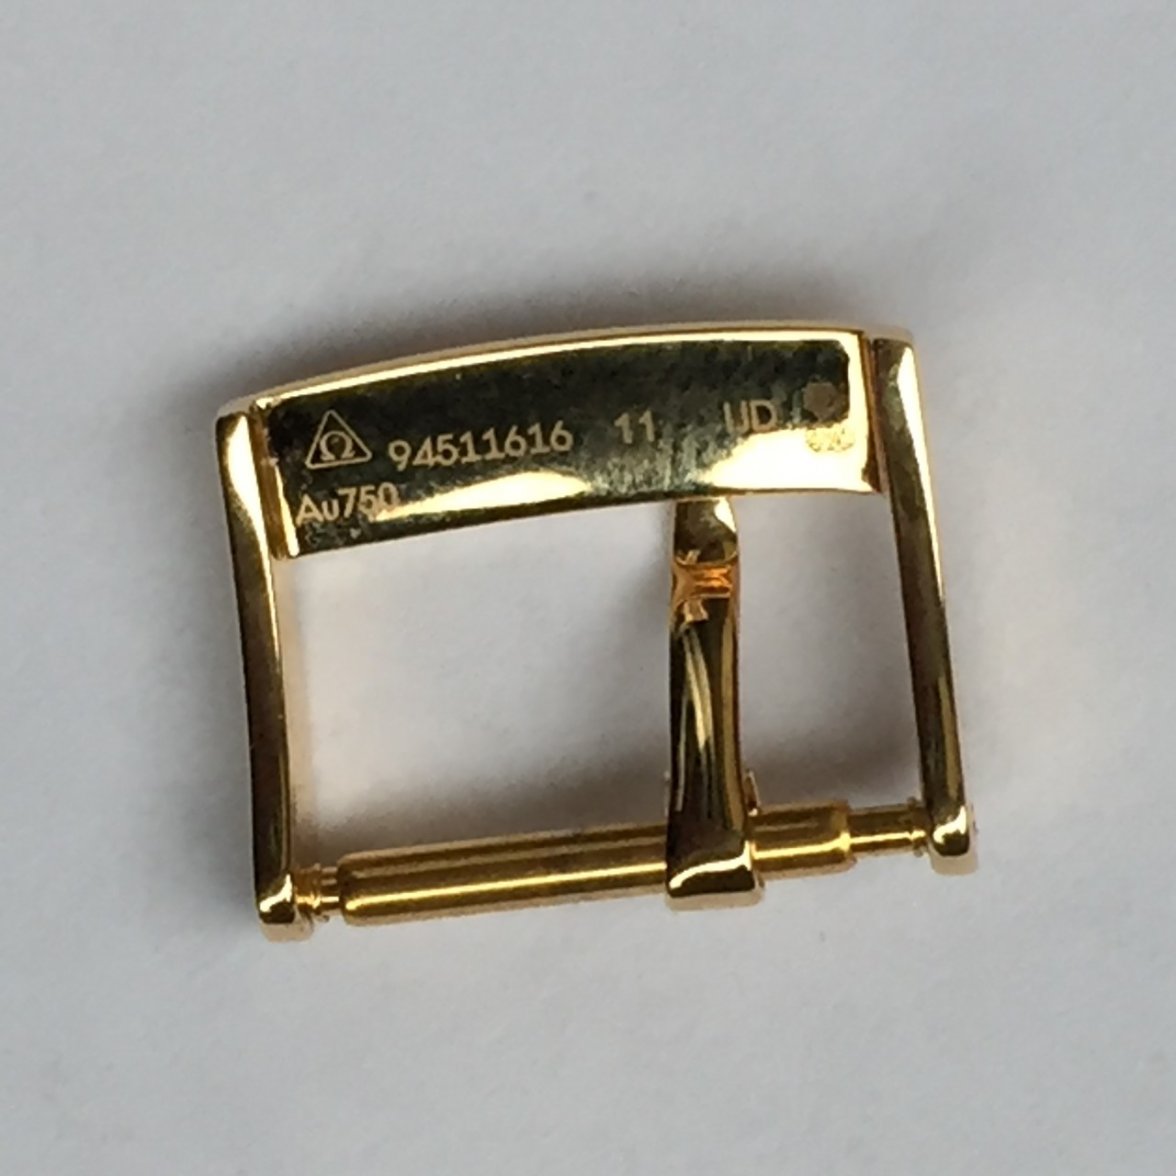 SOLD - Solid gold Omega 16mm pin buckle | Omega Forums